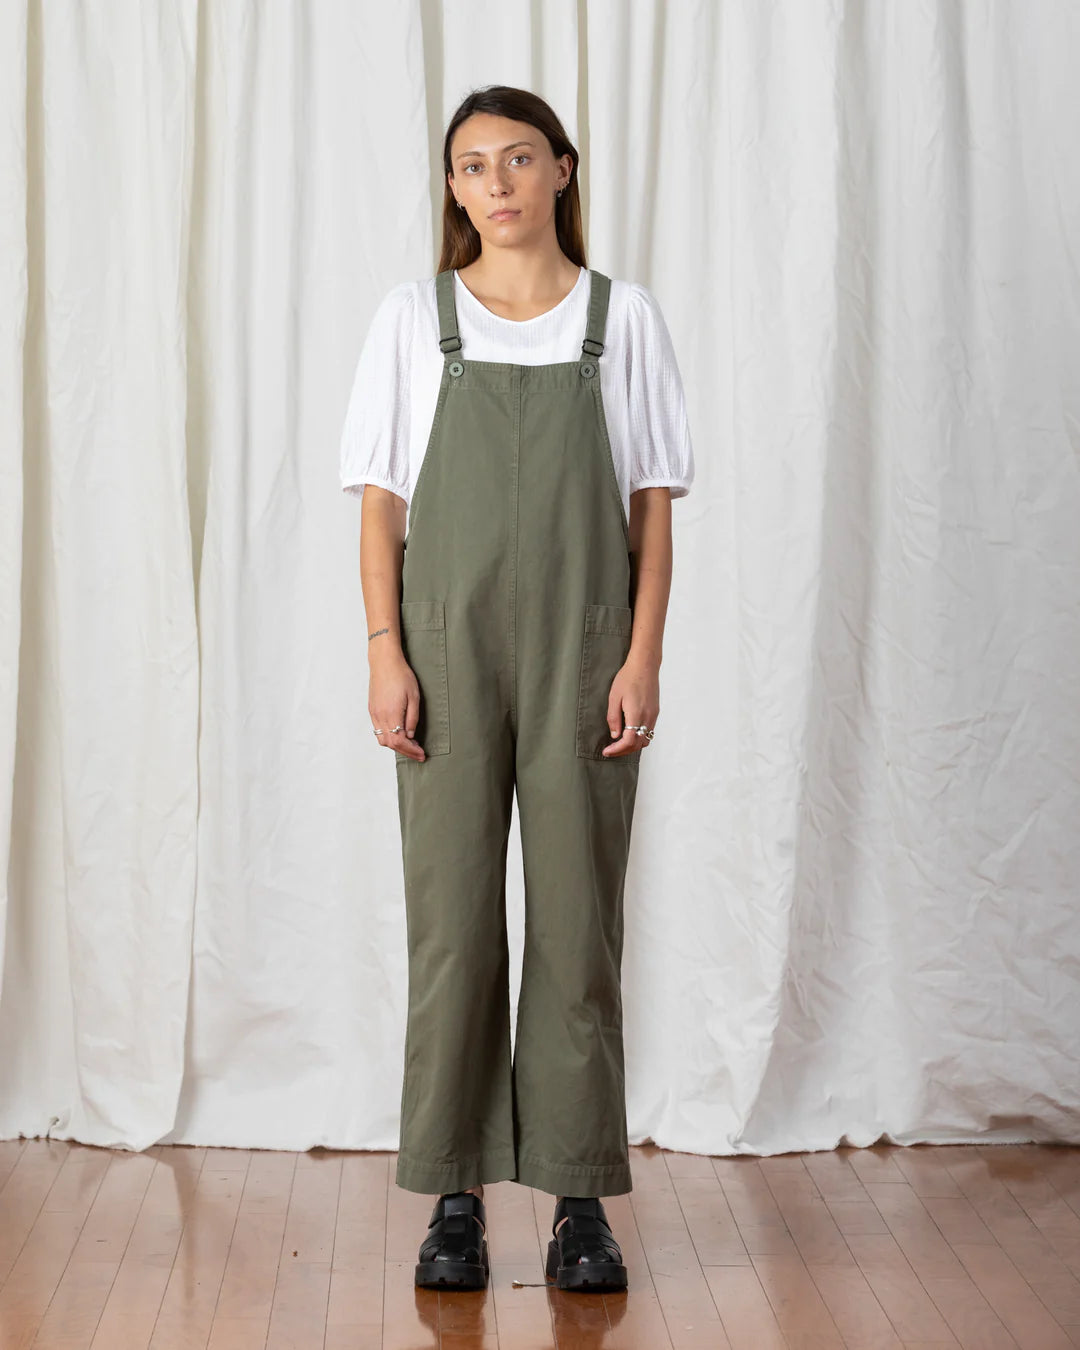 Overall Jumper - Faded Olive